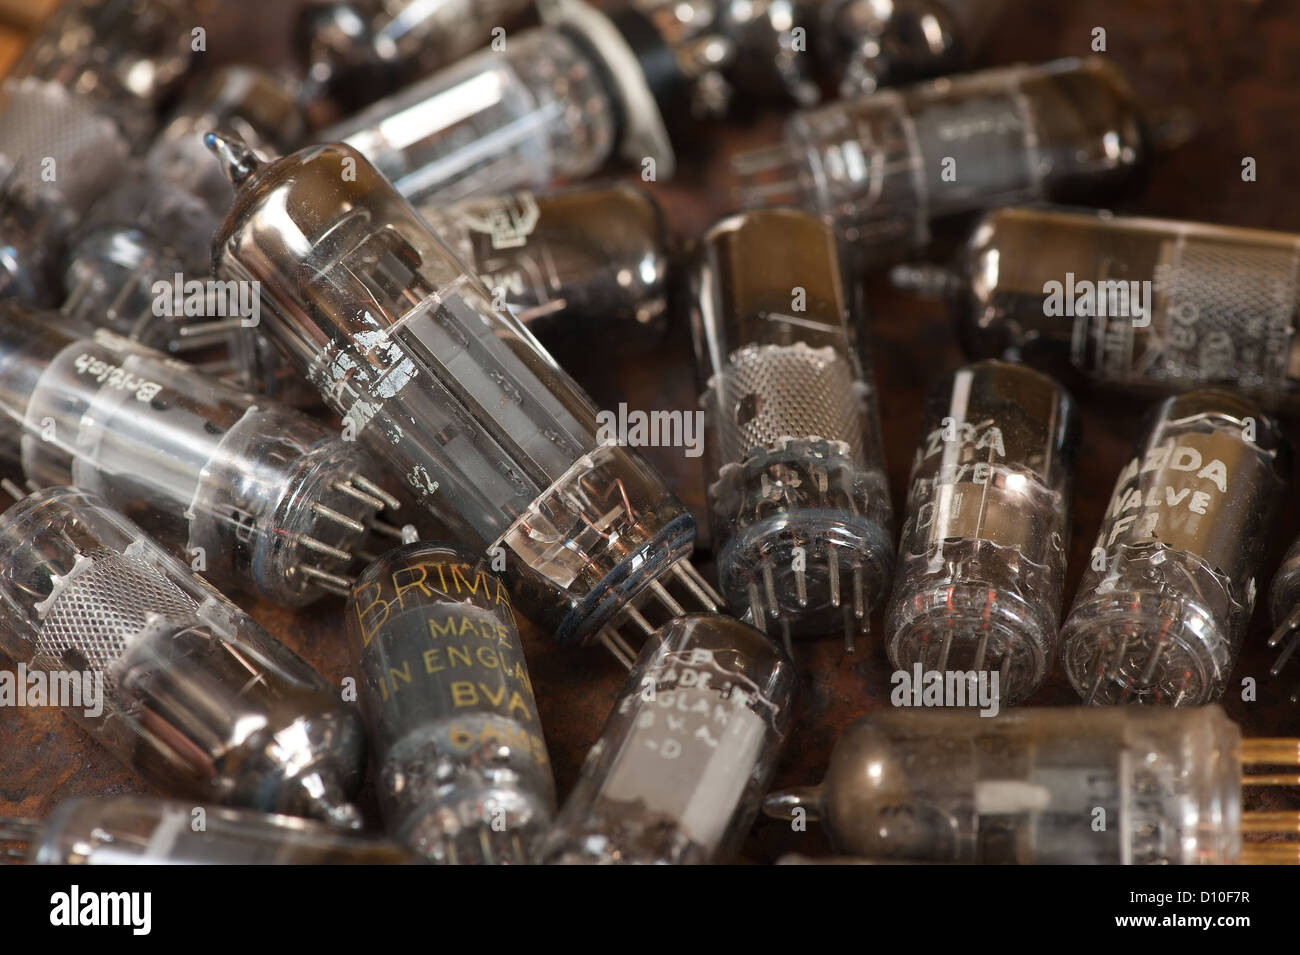 Pile of old used glass vacuum tubes used in radio and early tv crt